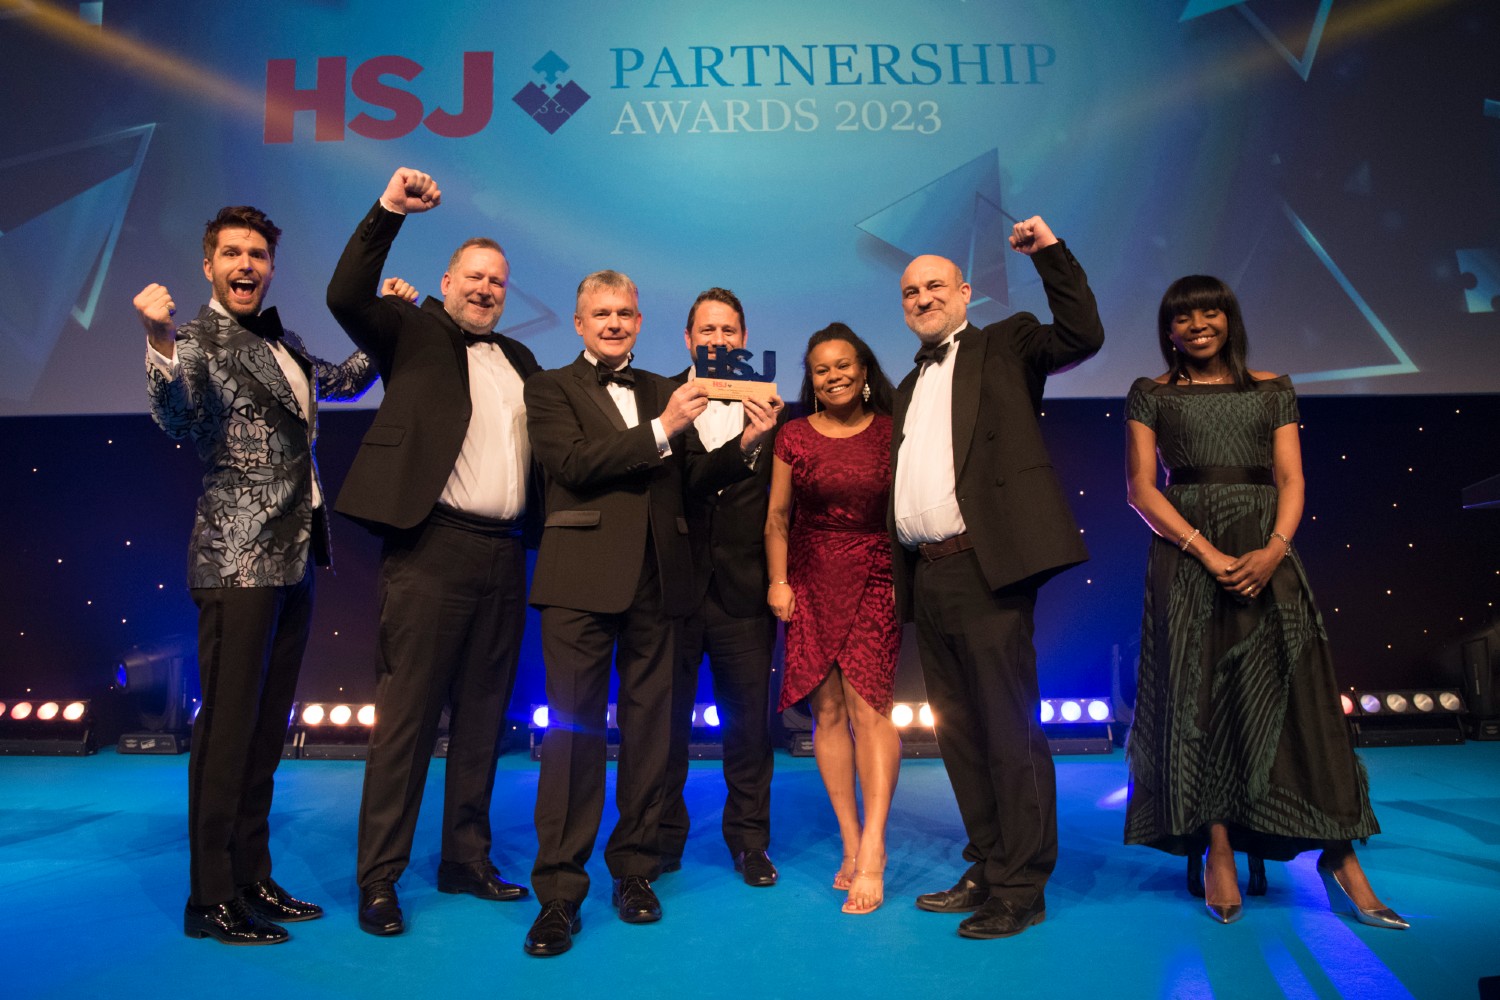 Seven people on stage wearing suits and dresses holding an award in front of a background that says: HSJ Partnership Awards